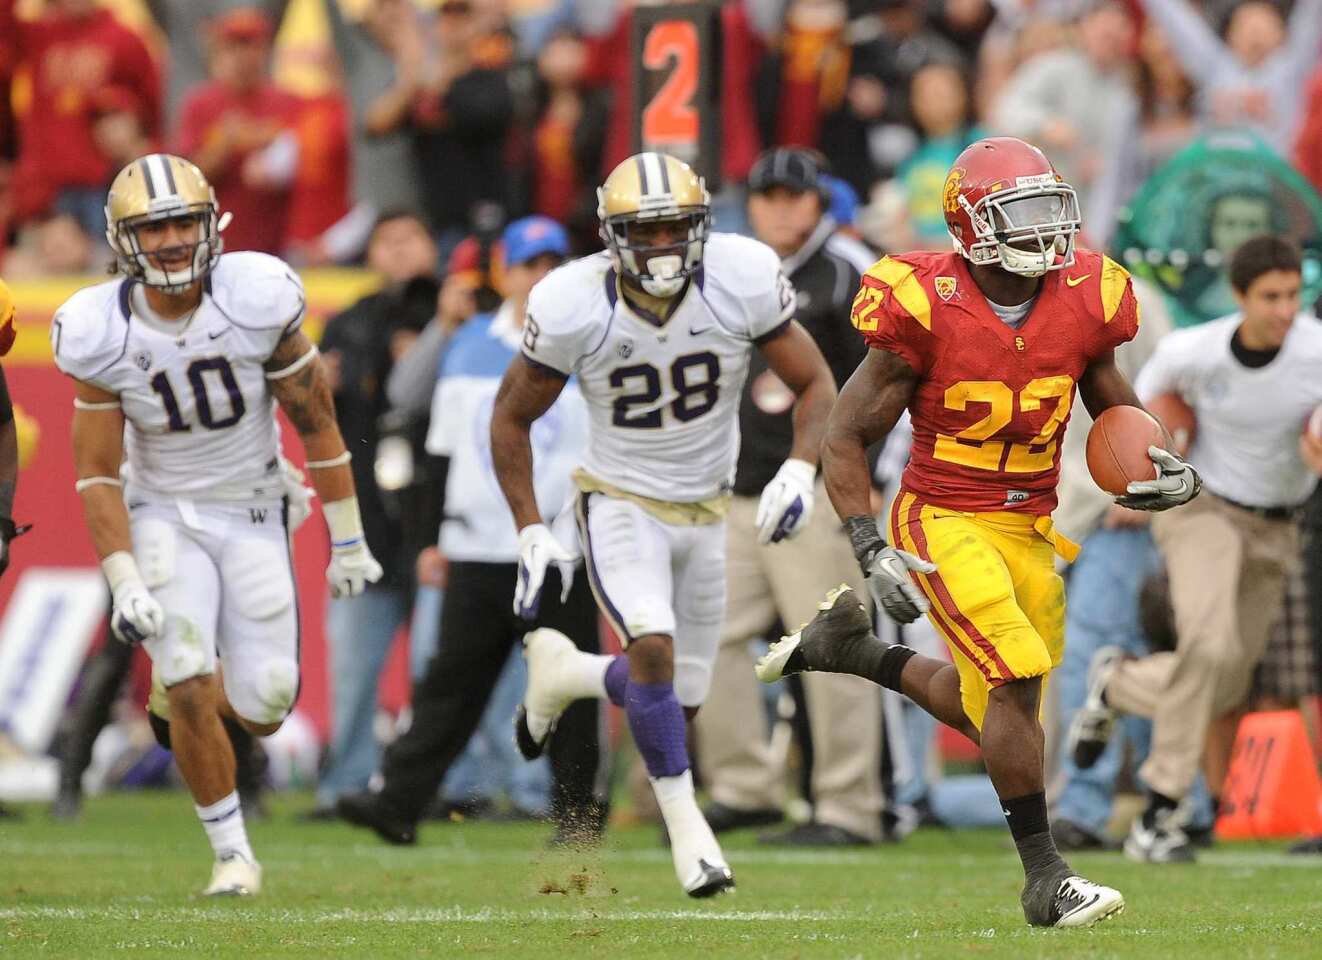 USC tailback Curtis McNeal is off to the races after getting past Washington defenders John Timu, left, and Quinton Richardson on a 79-yard scoring run in the third quarter Saturday.